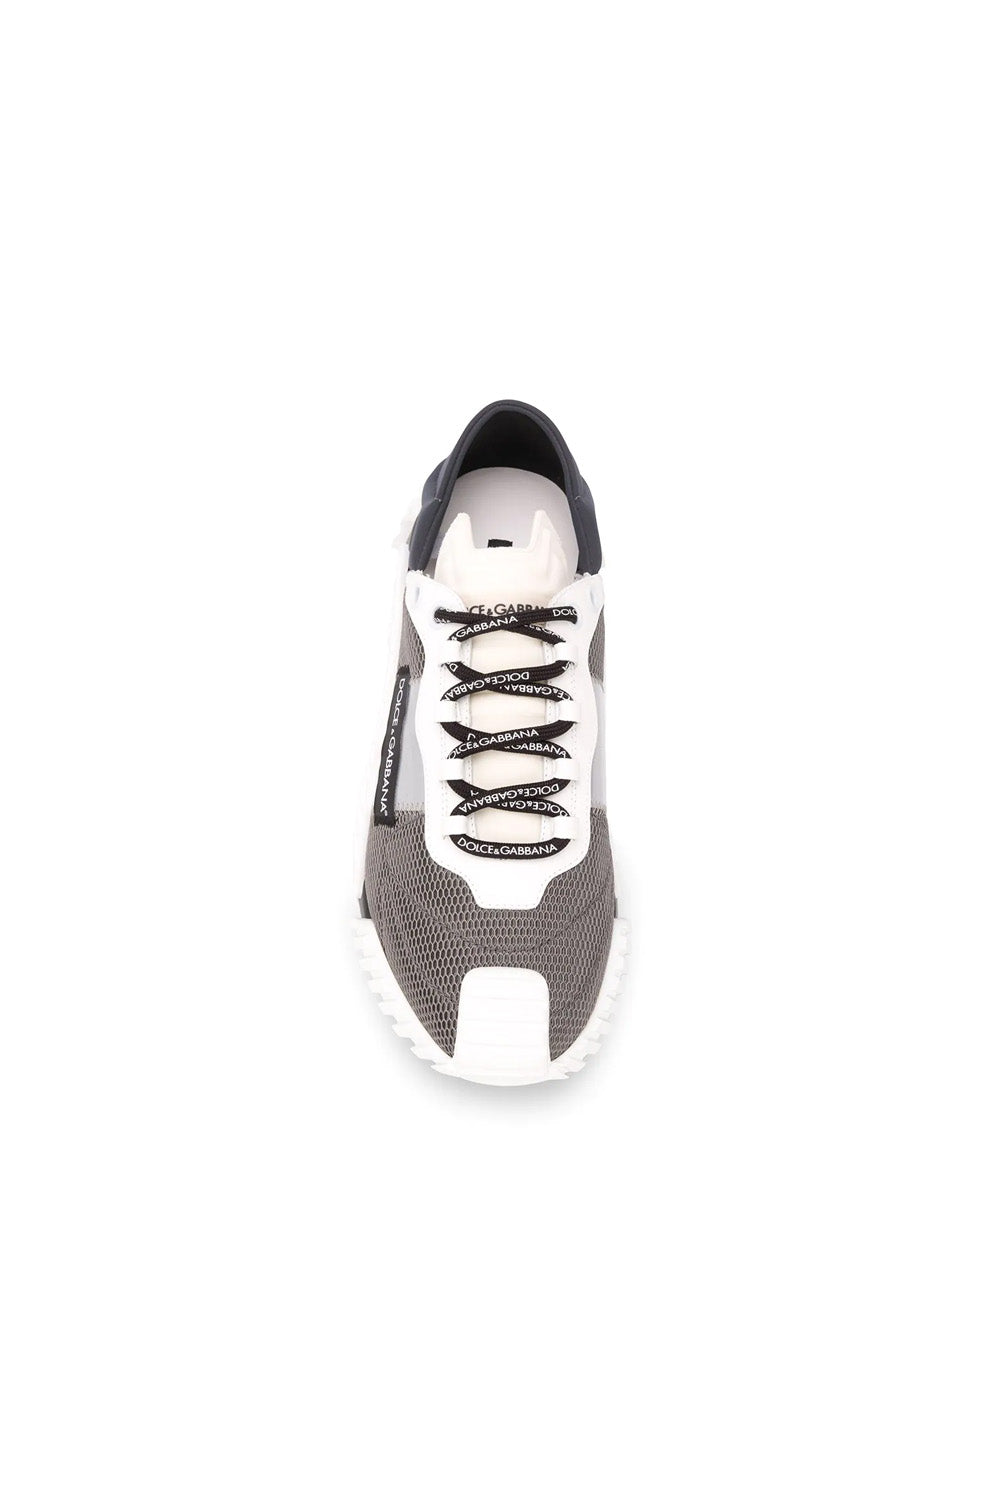 Dolce Gabbana NS1 low-top sneakers